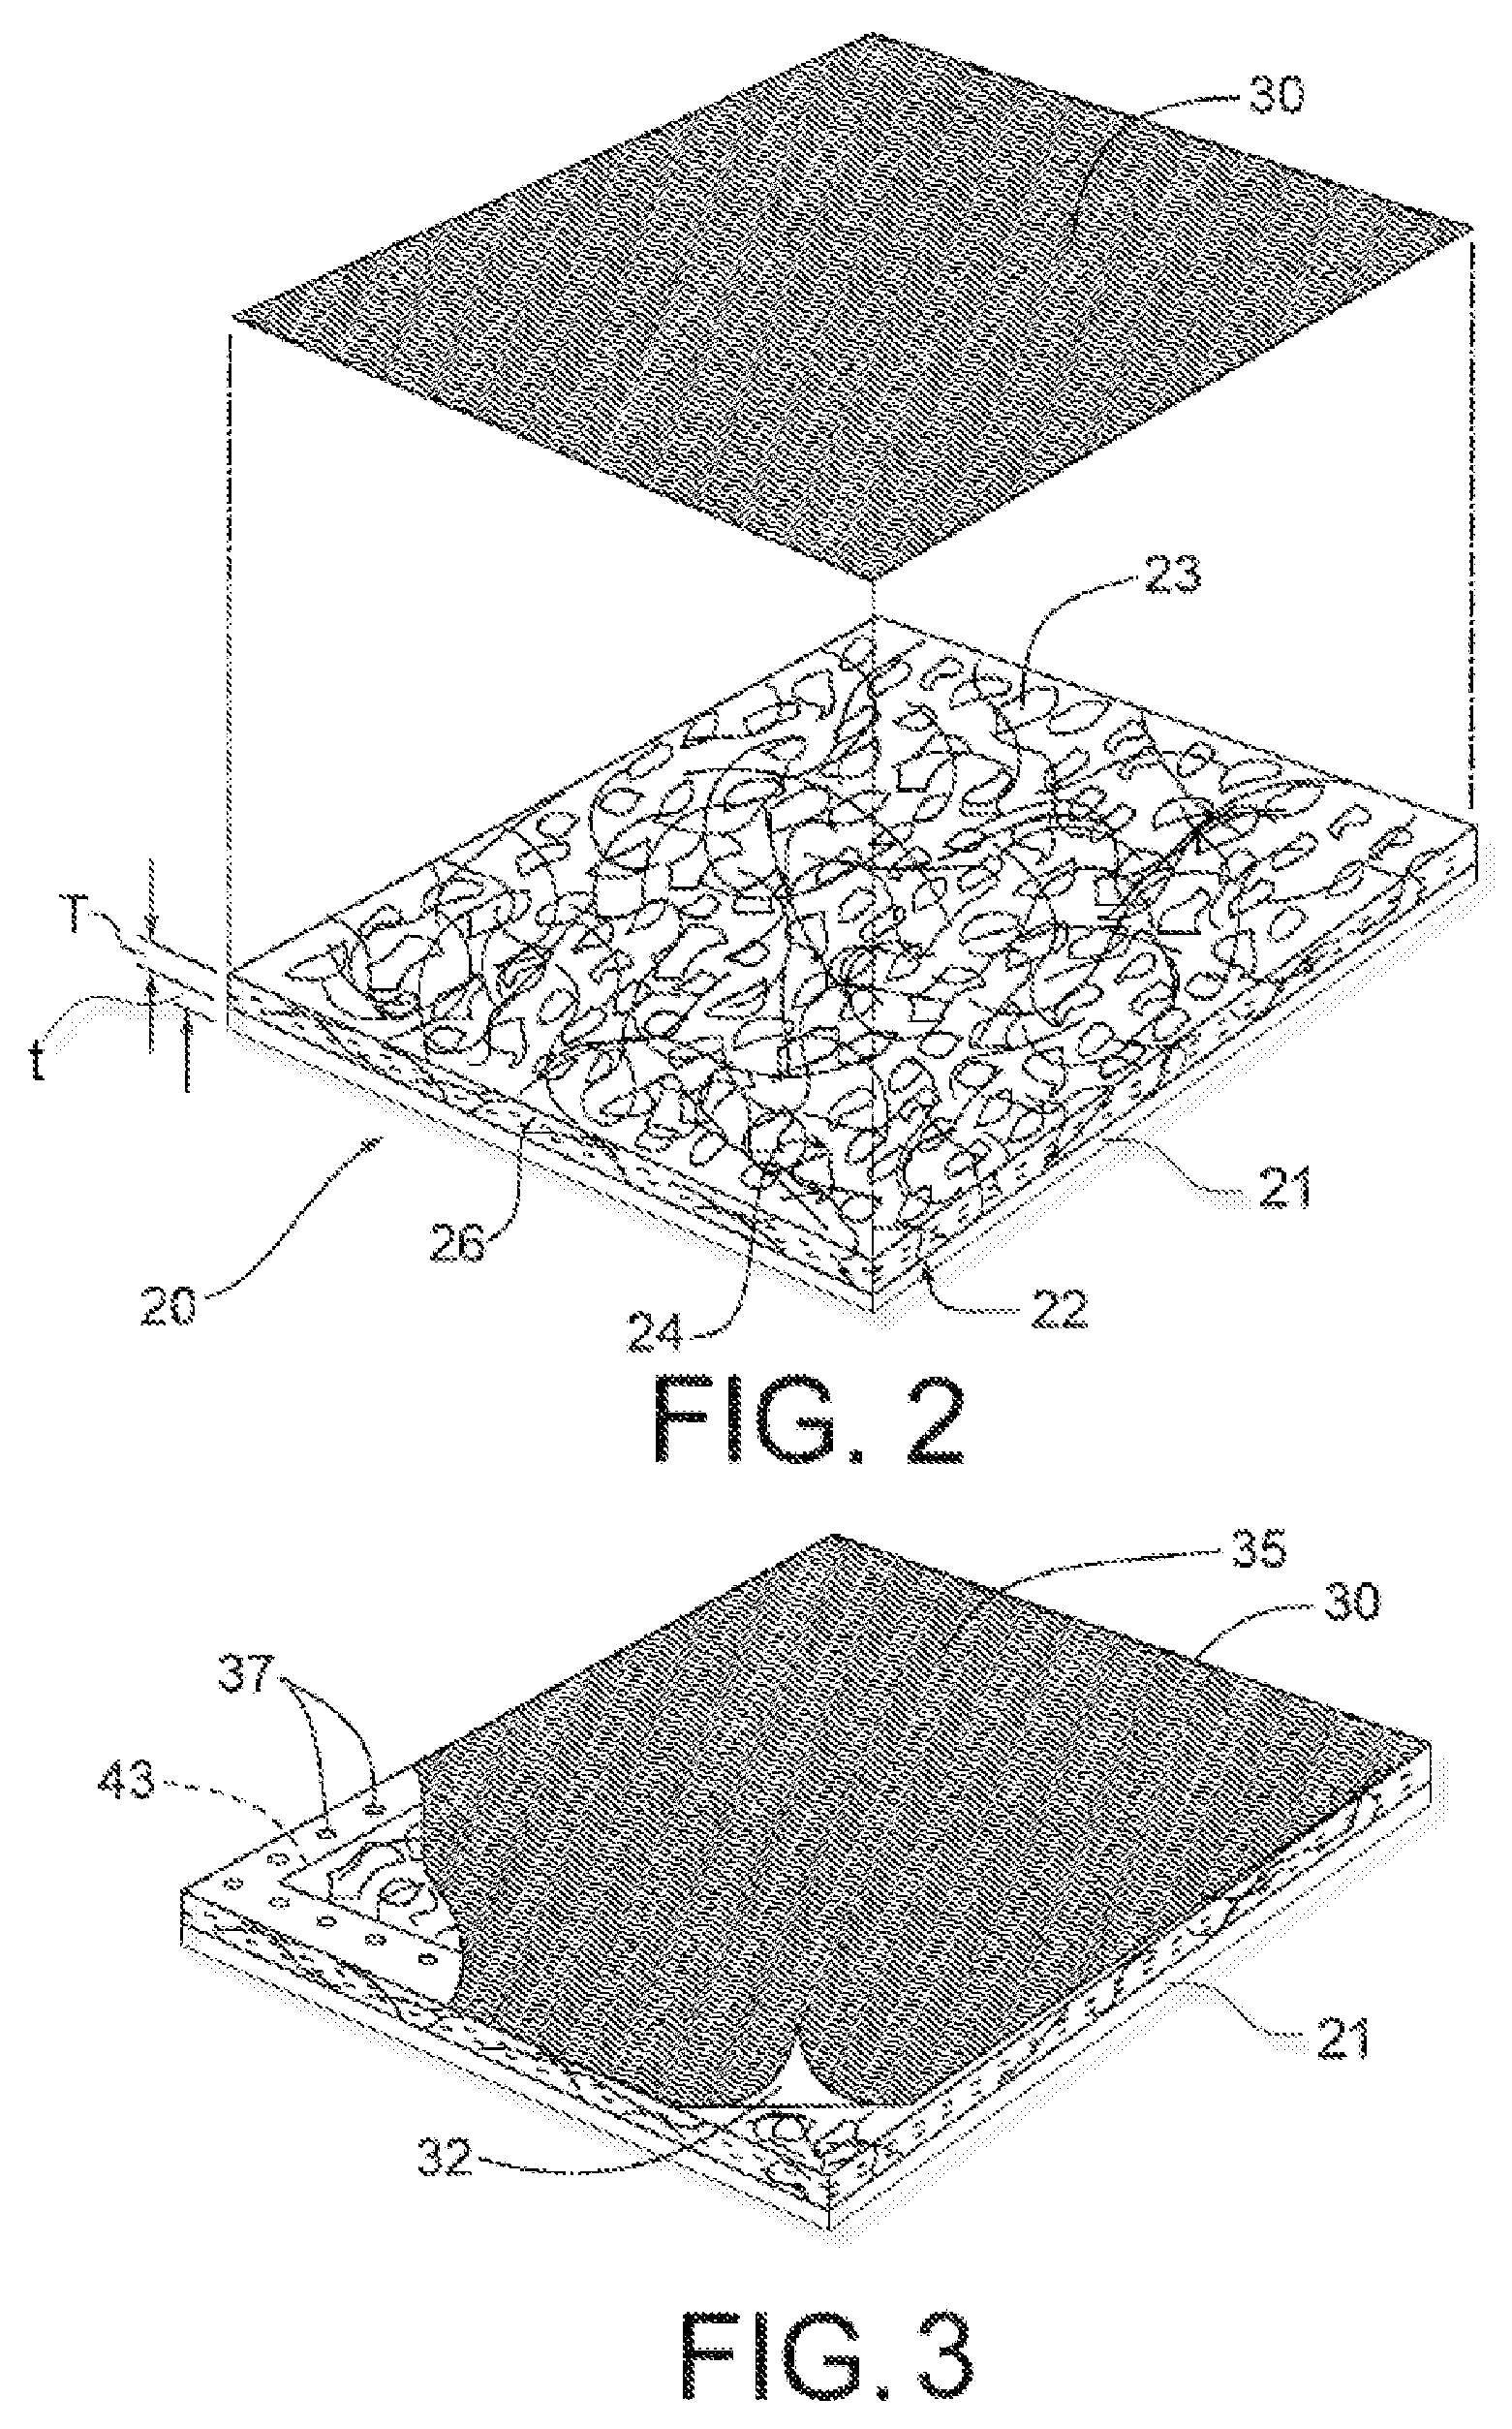 Insulated sheathing panel and methods for use and manufacture thereof